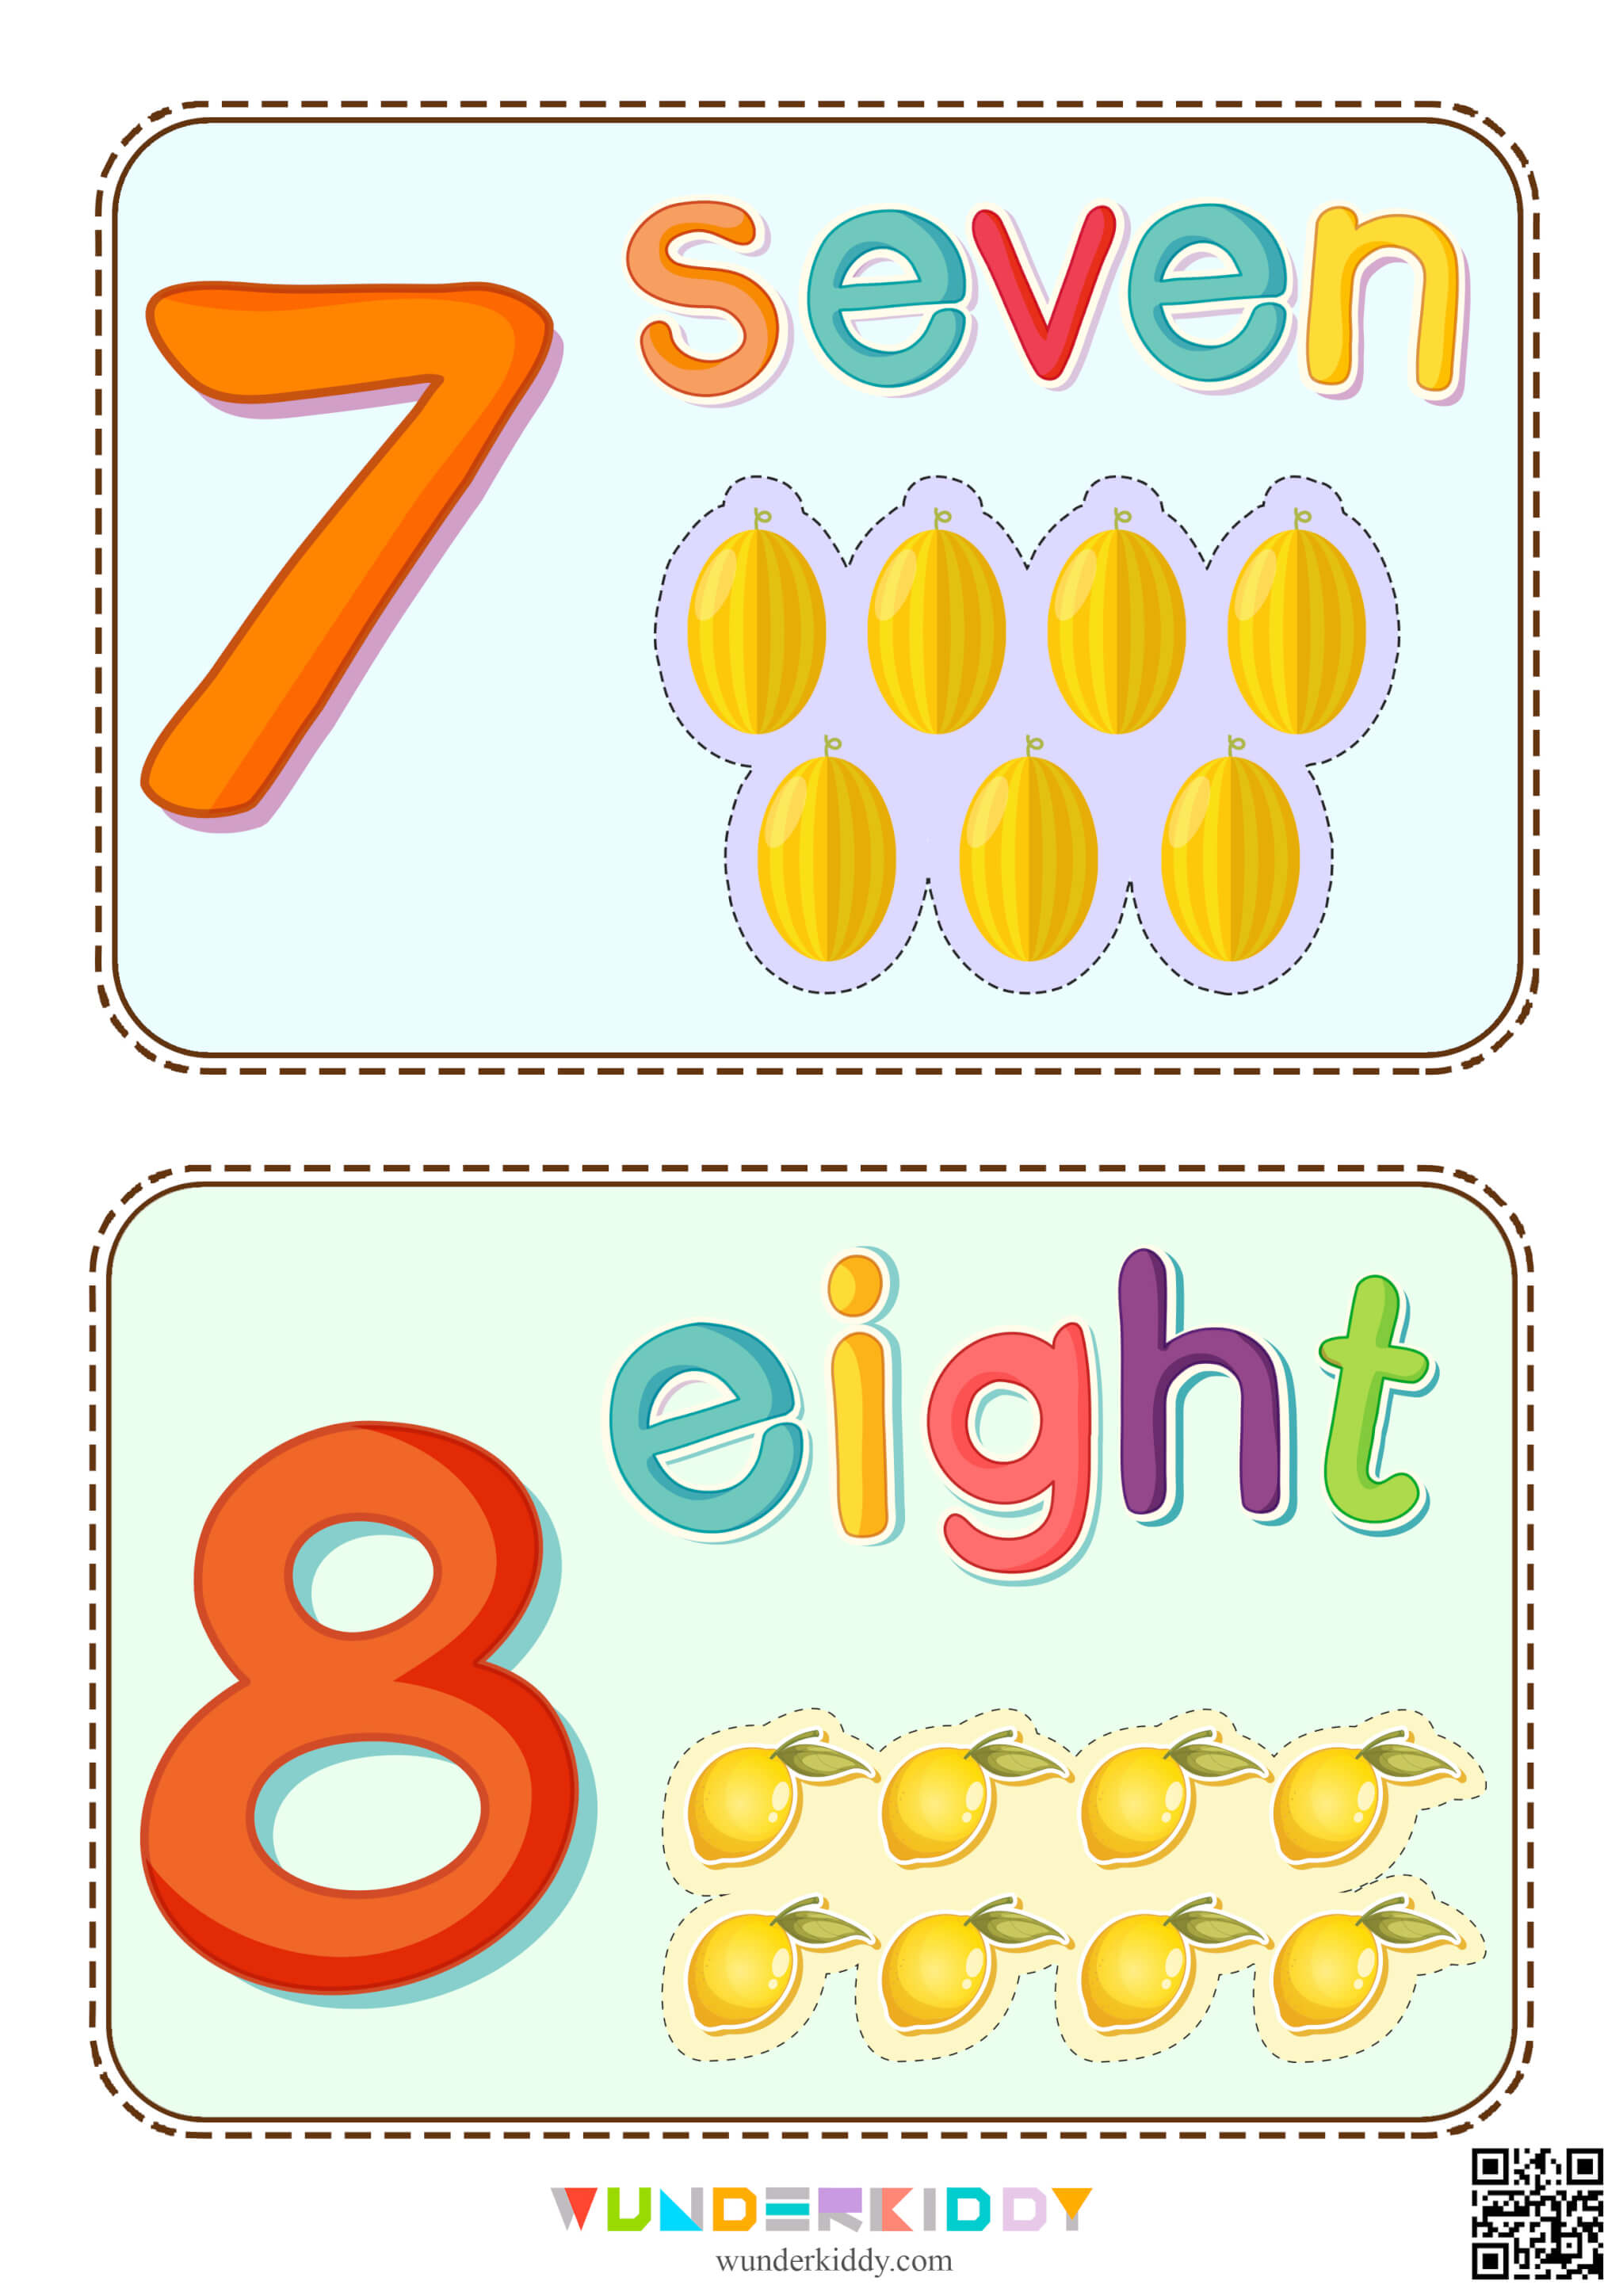 Illustrated Number Flashcards - Image 5